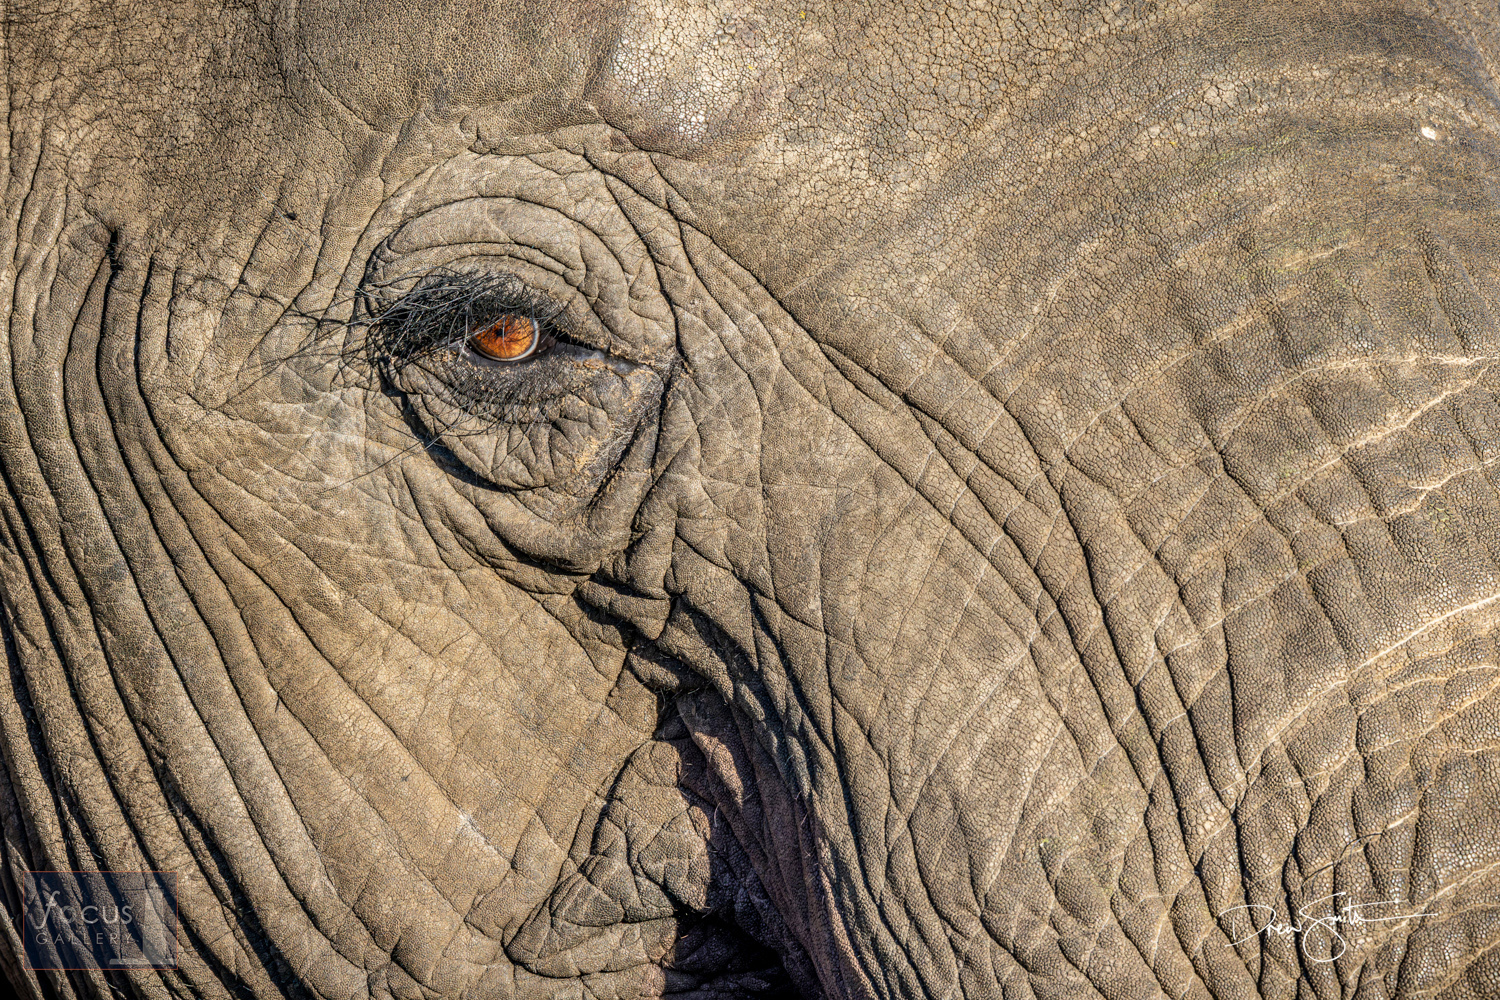 A close-up of an African Elephant's face and eye shows the amazing details and textures of the skin of these amazing, intelligent...